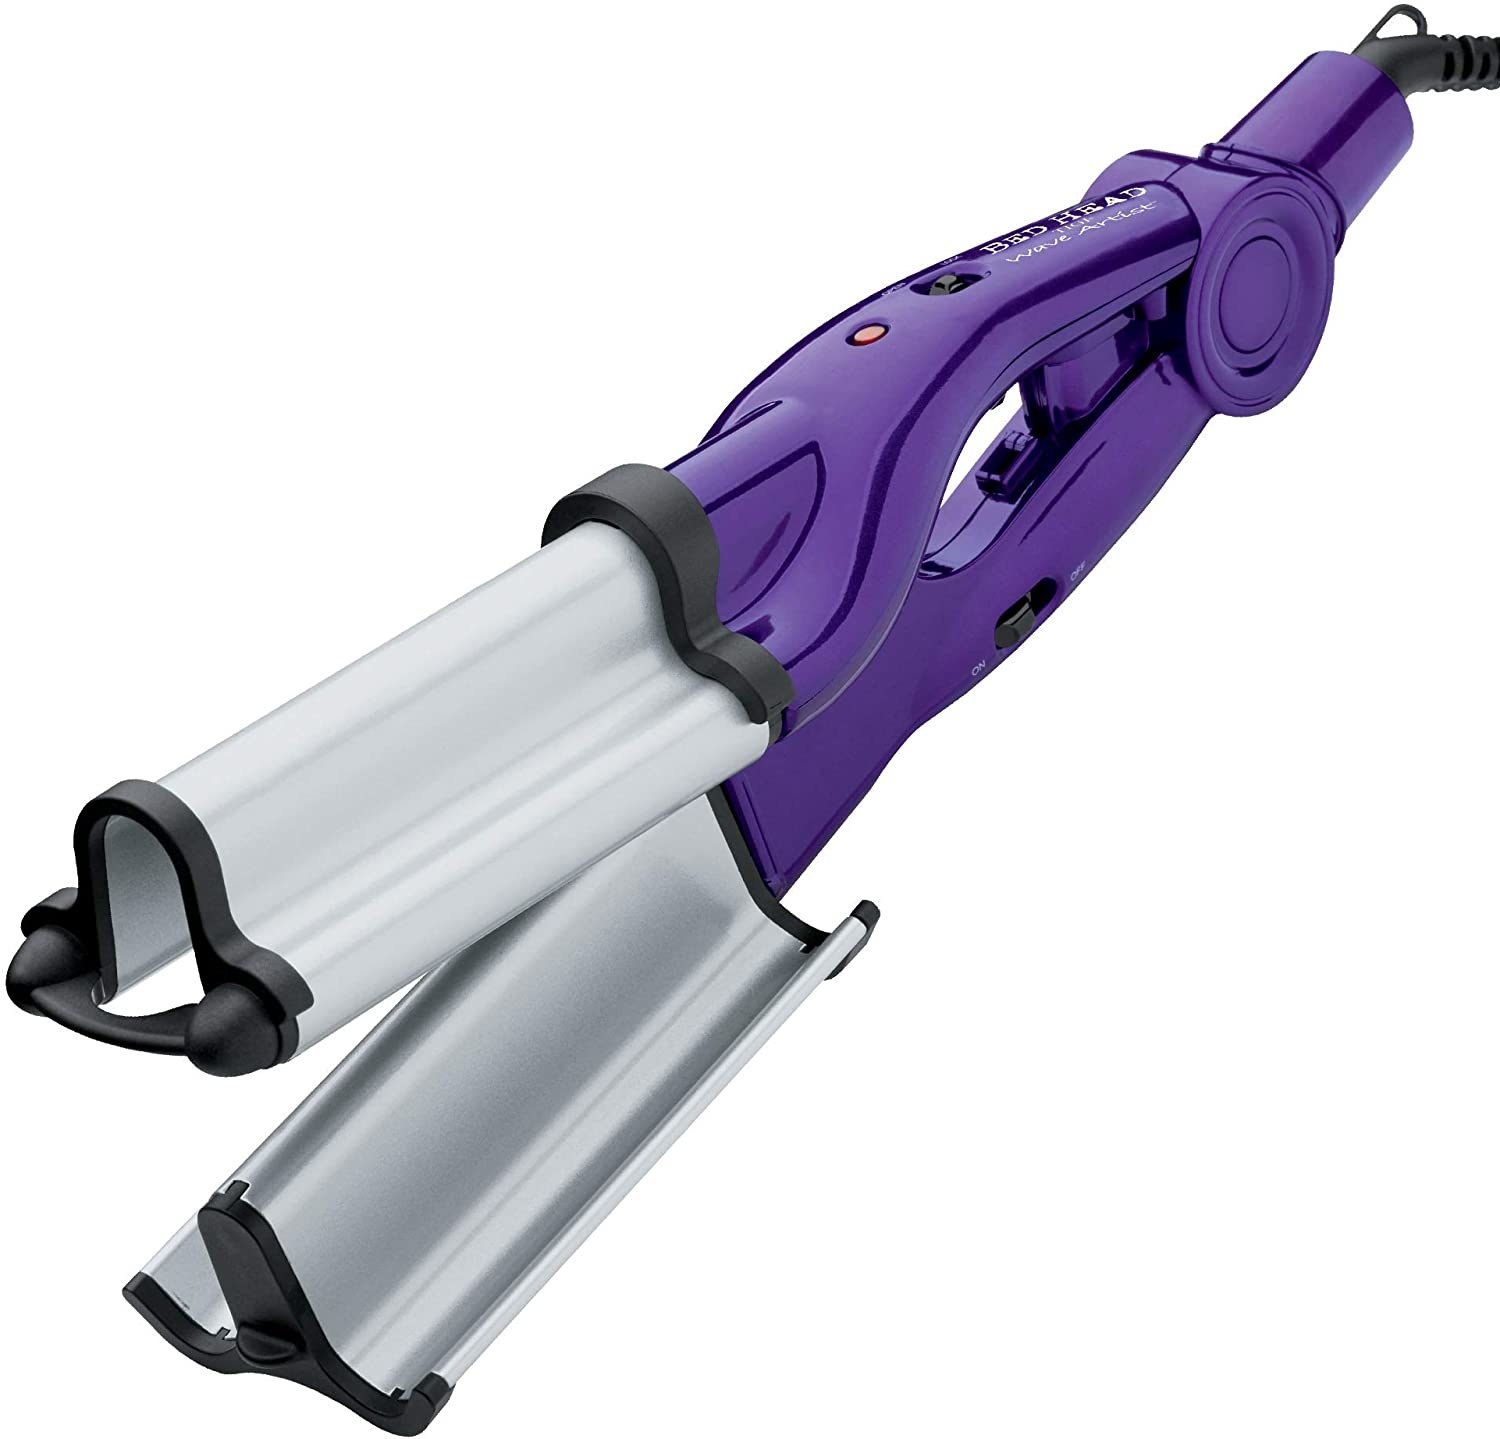 The curling iron